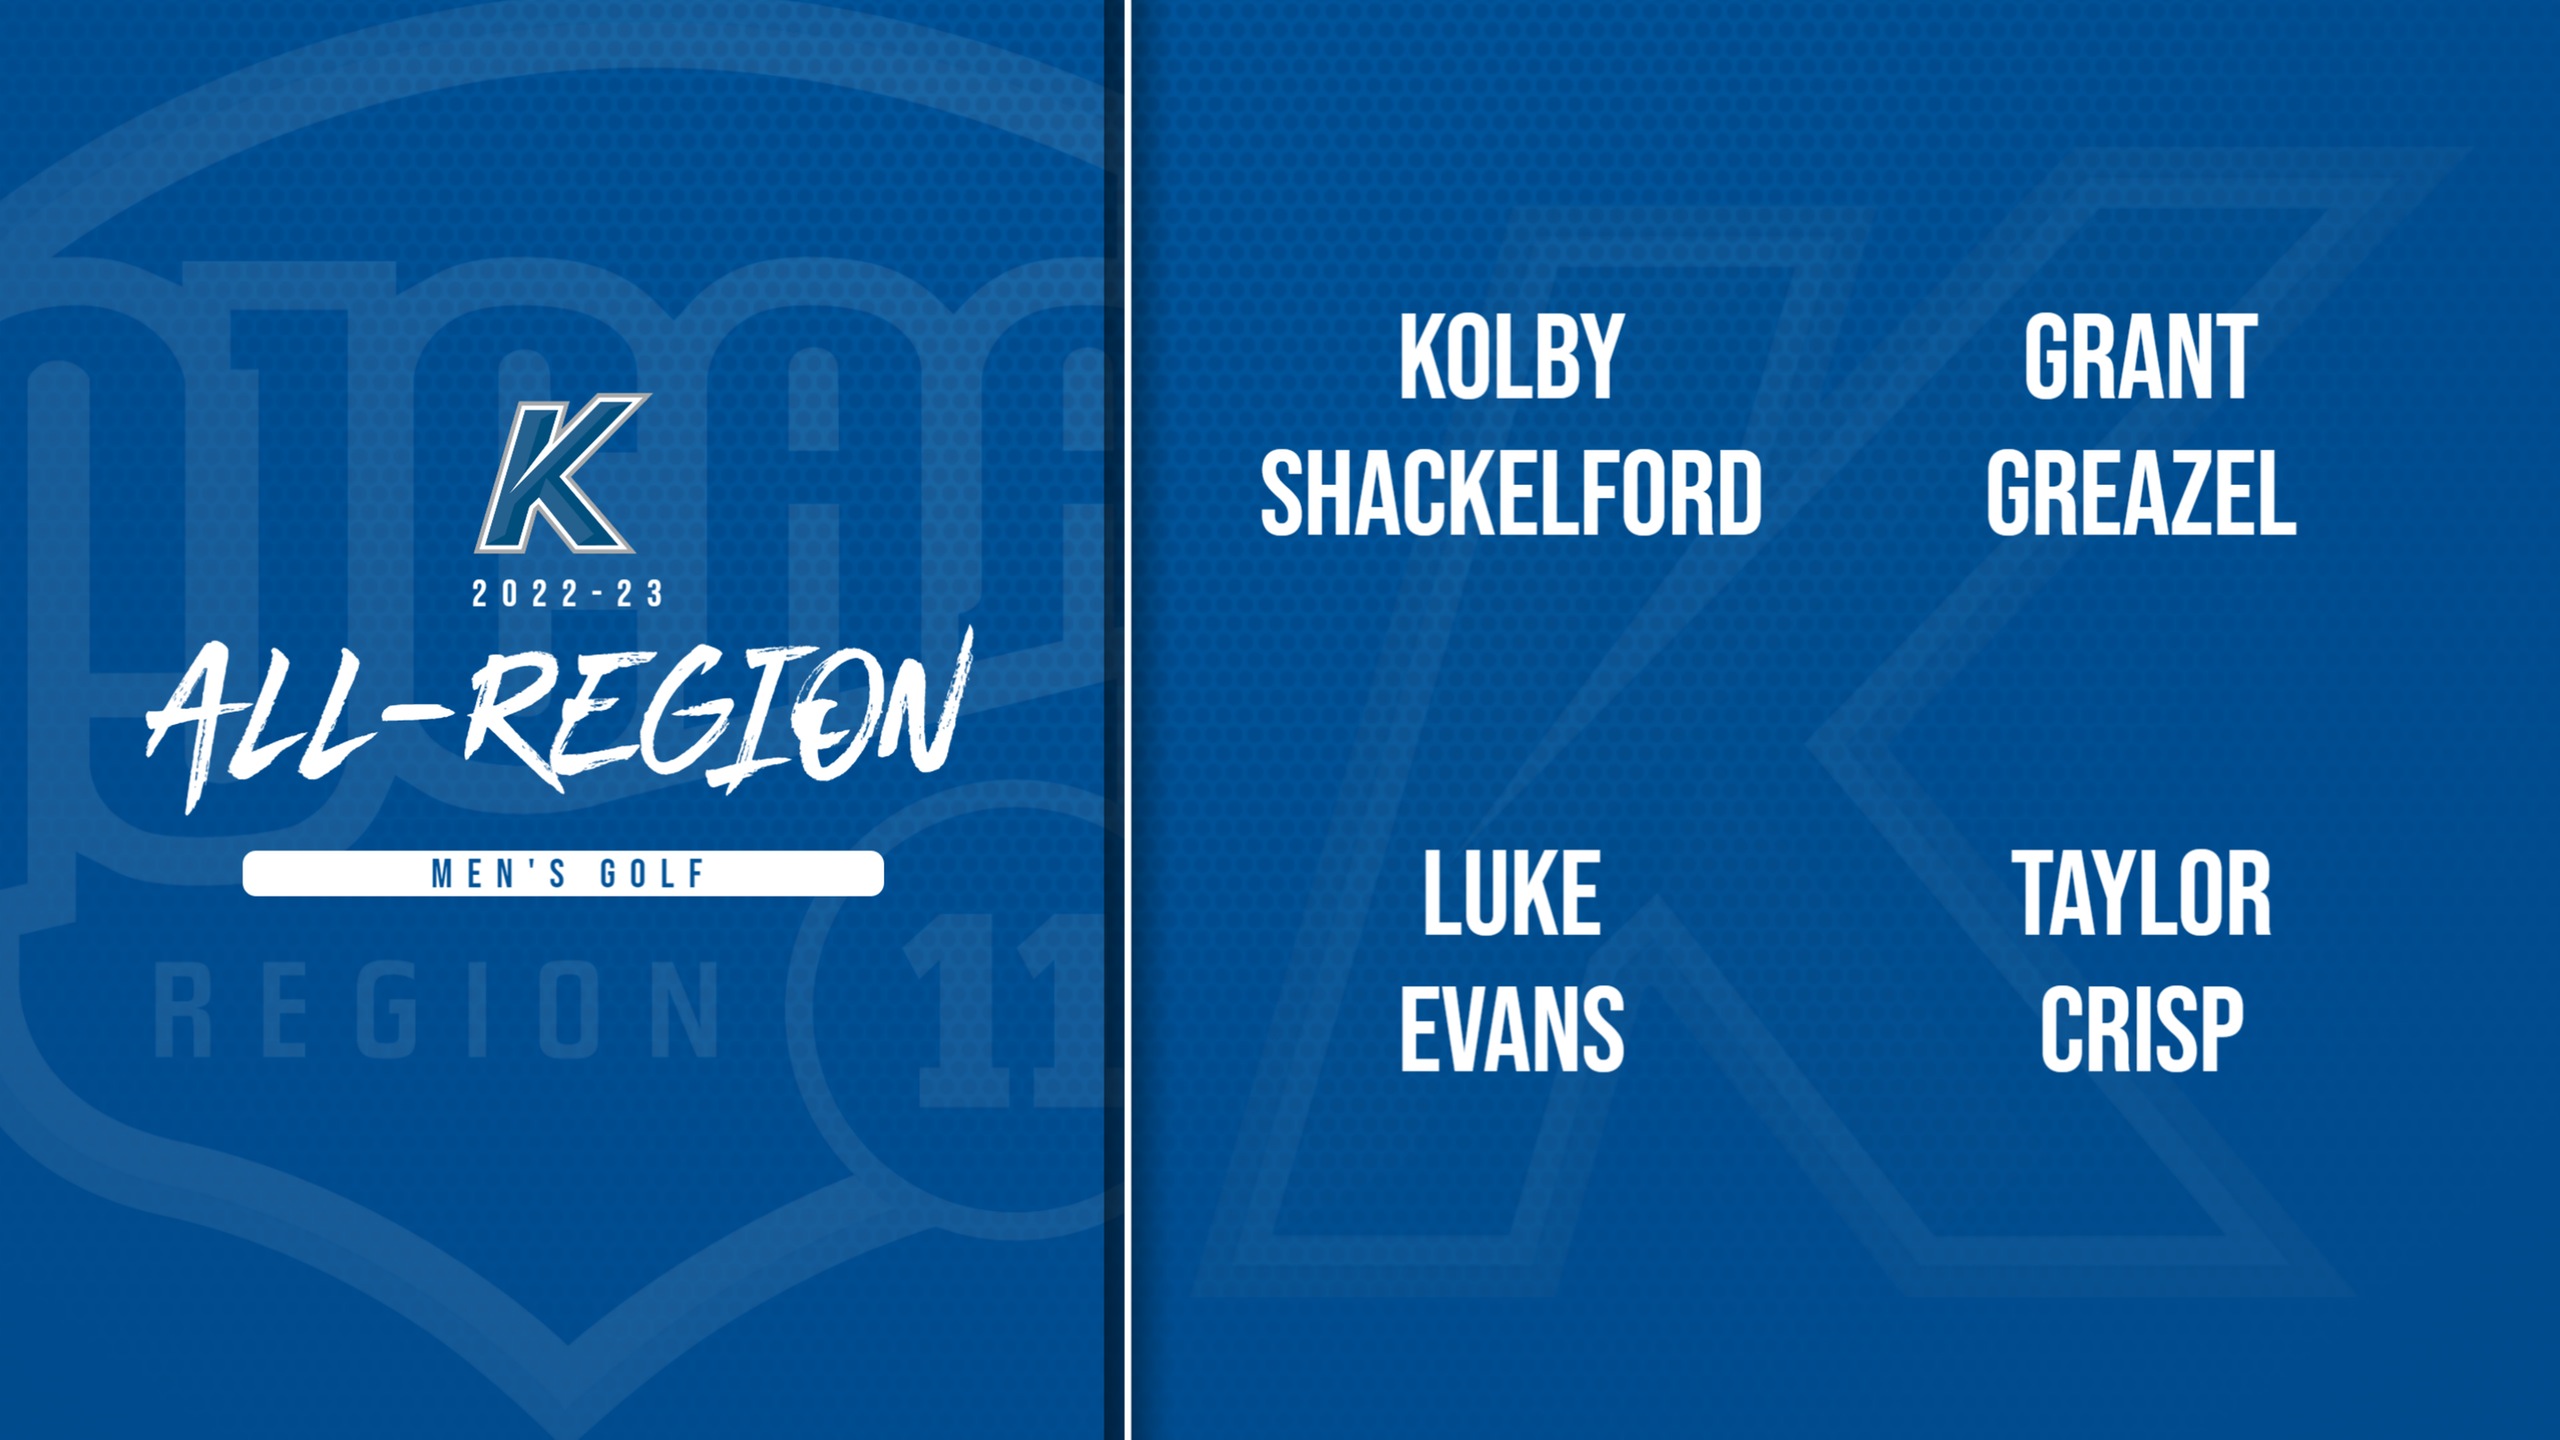 The ICCAC announced the Division II Men's Golf All-Region Awards